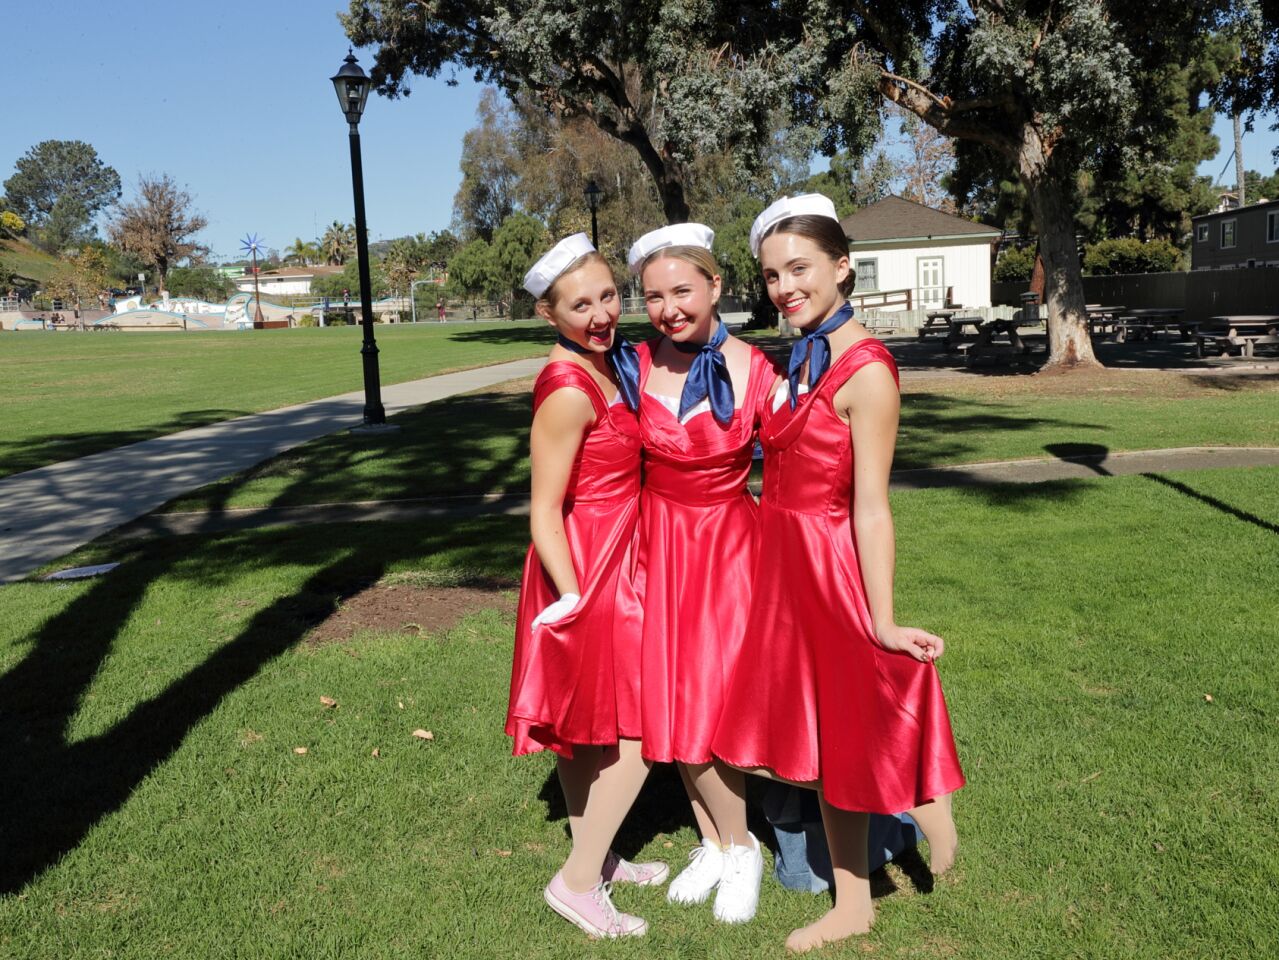 Kylie Kennard, Sandy Cameron, and Roby Kloer from the Santa Fe Christian School Dance Troupe